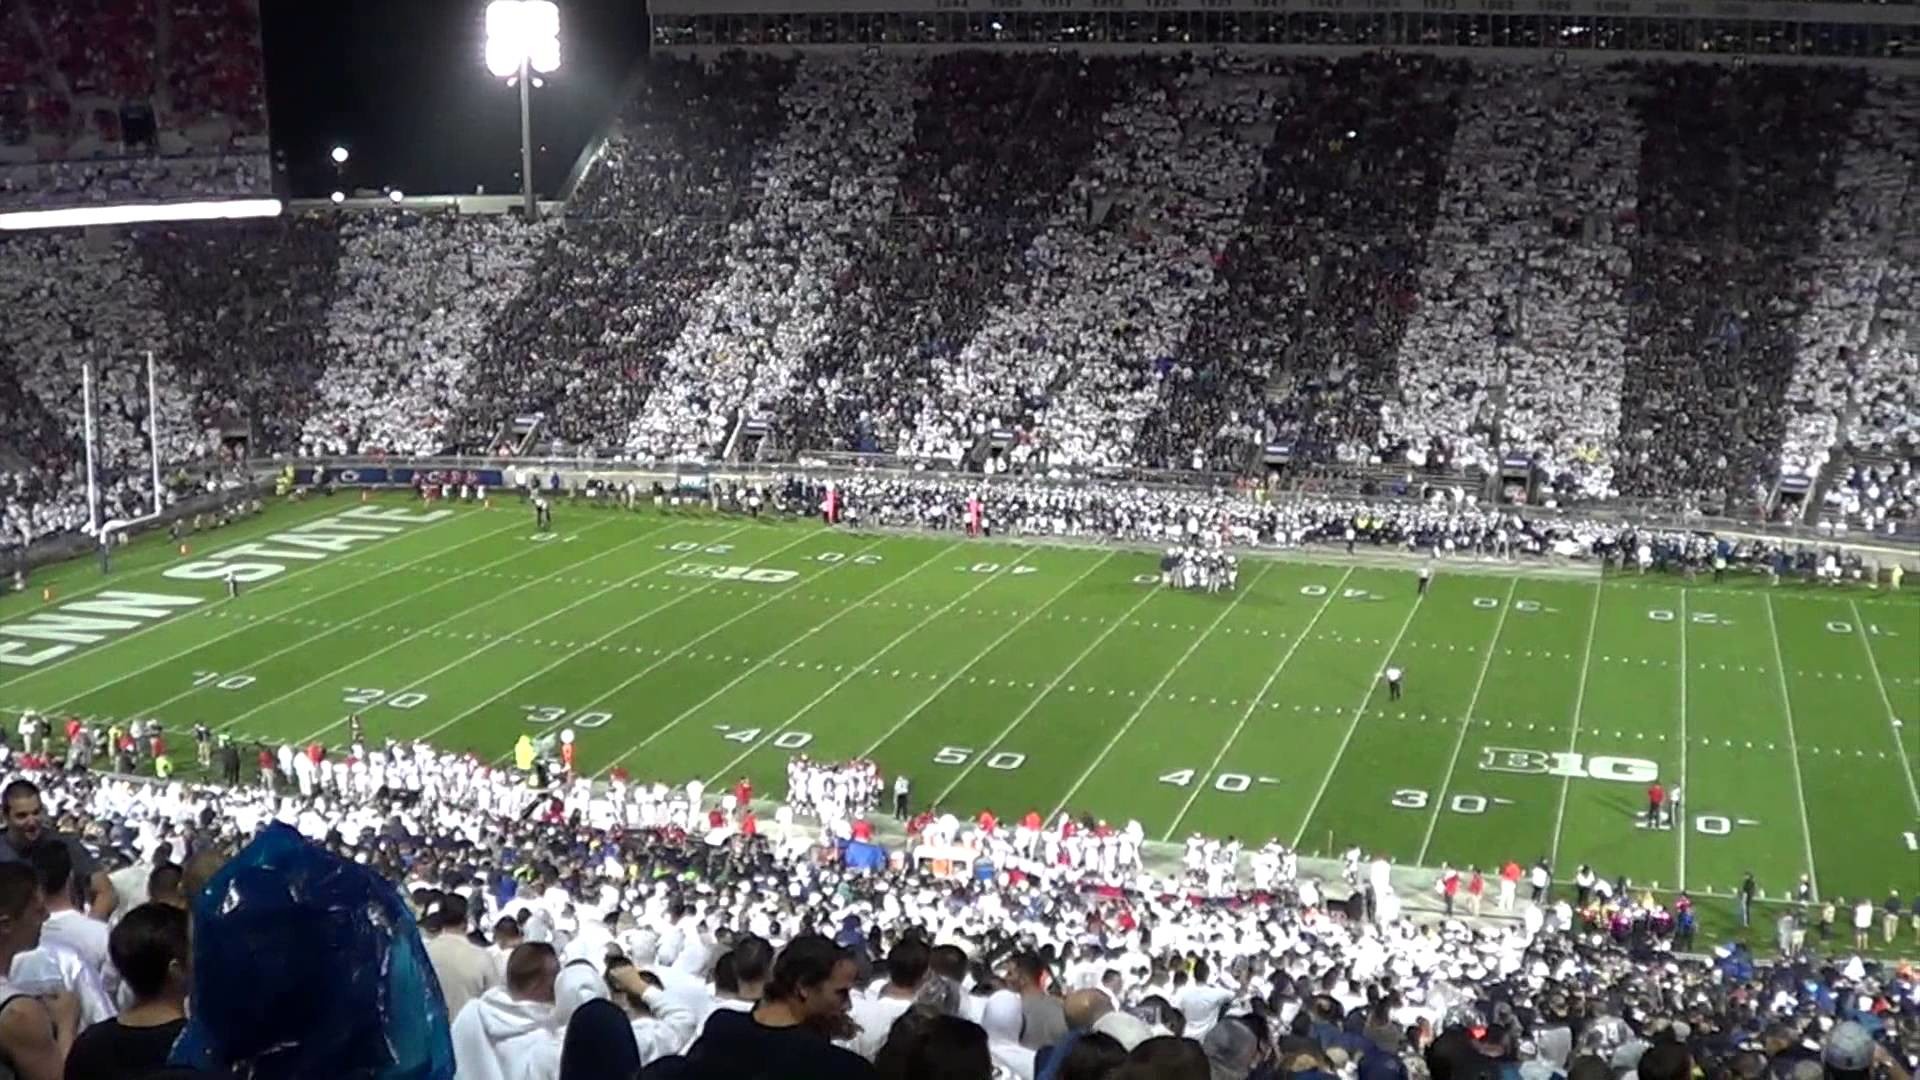 1920x1080 Penn State Student Section singing Living on a Prayer.